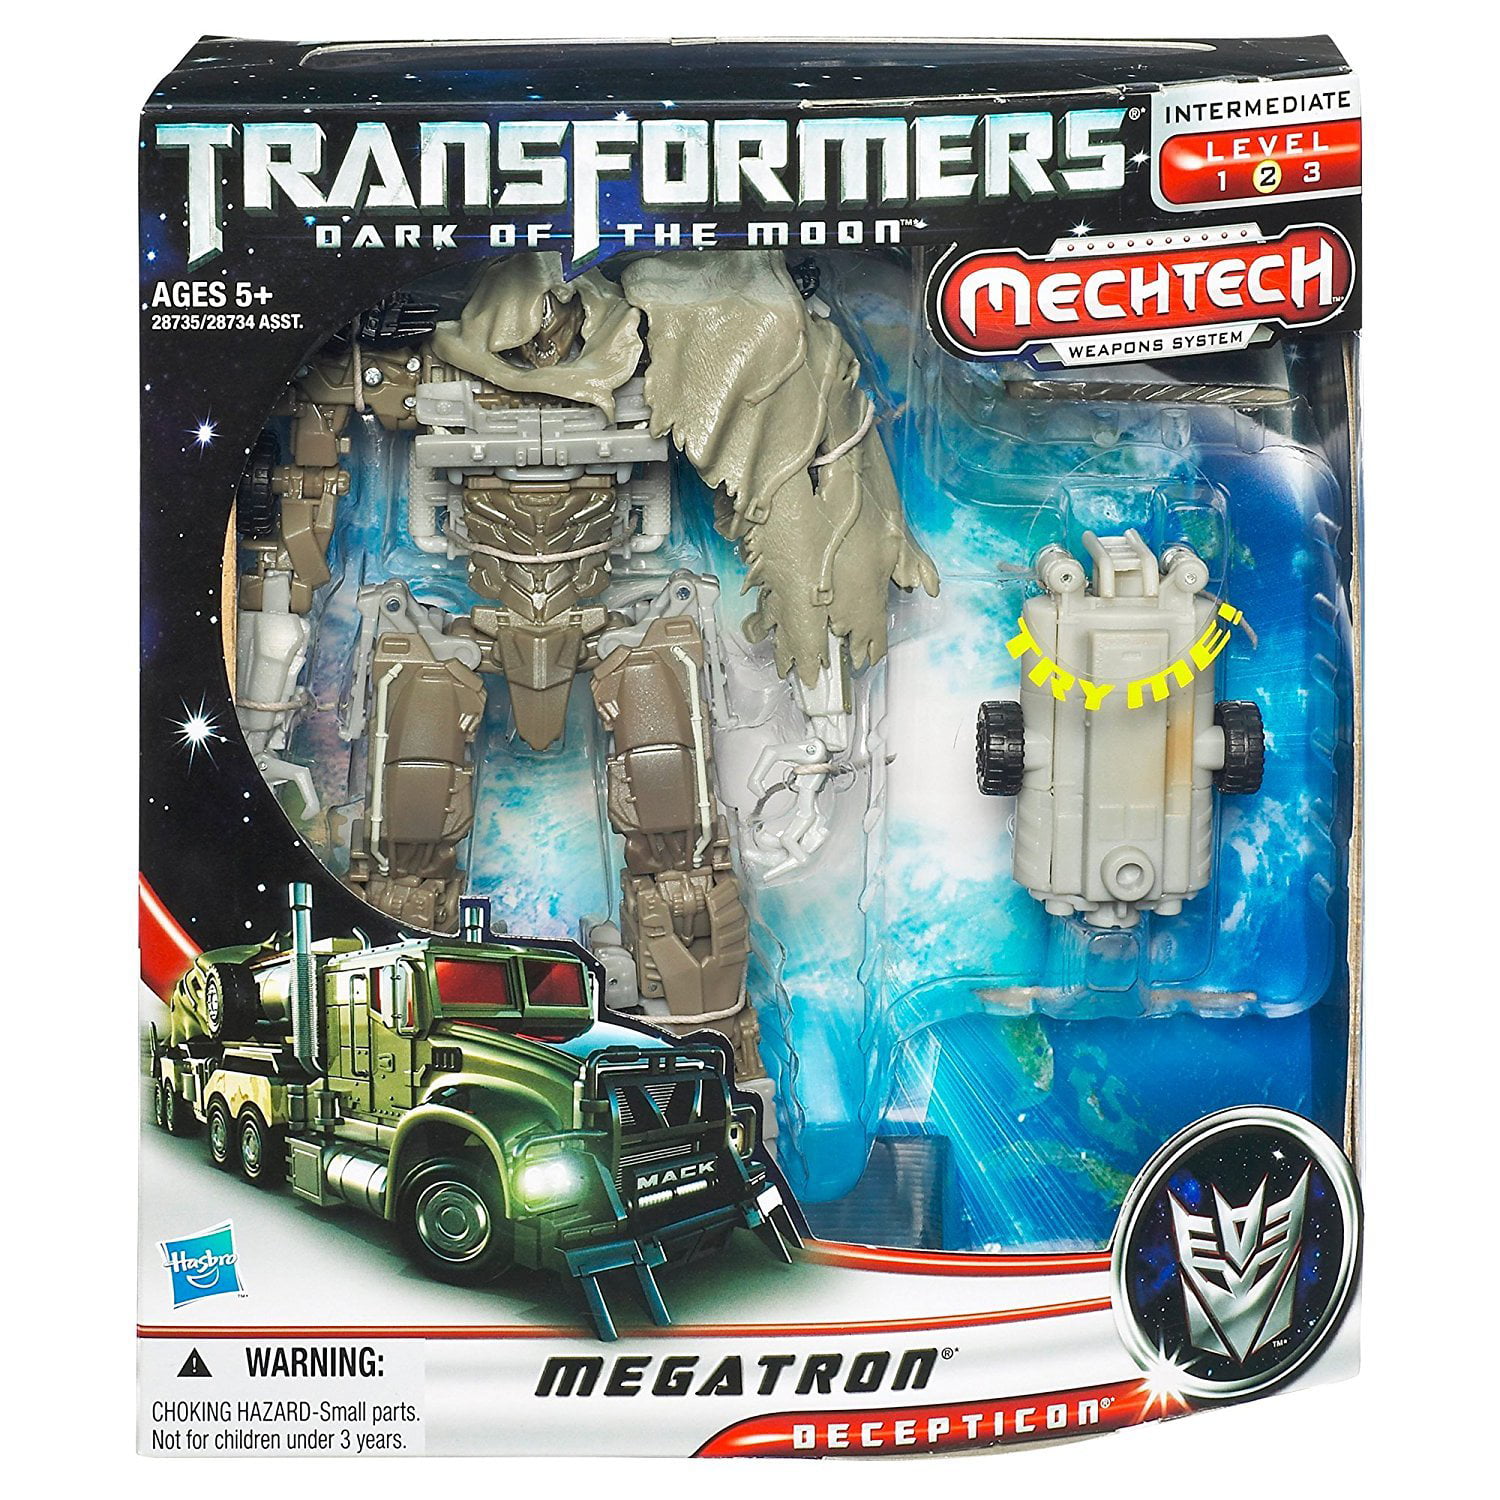 Transformers 3 Dark Of The Moon Voyager 15cm Megatron Action Figure Toy New 